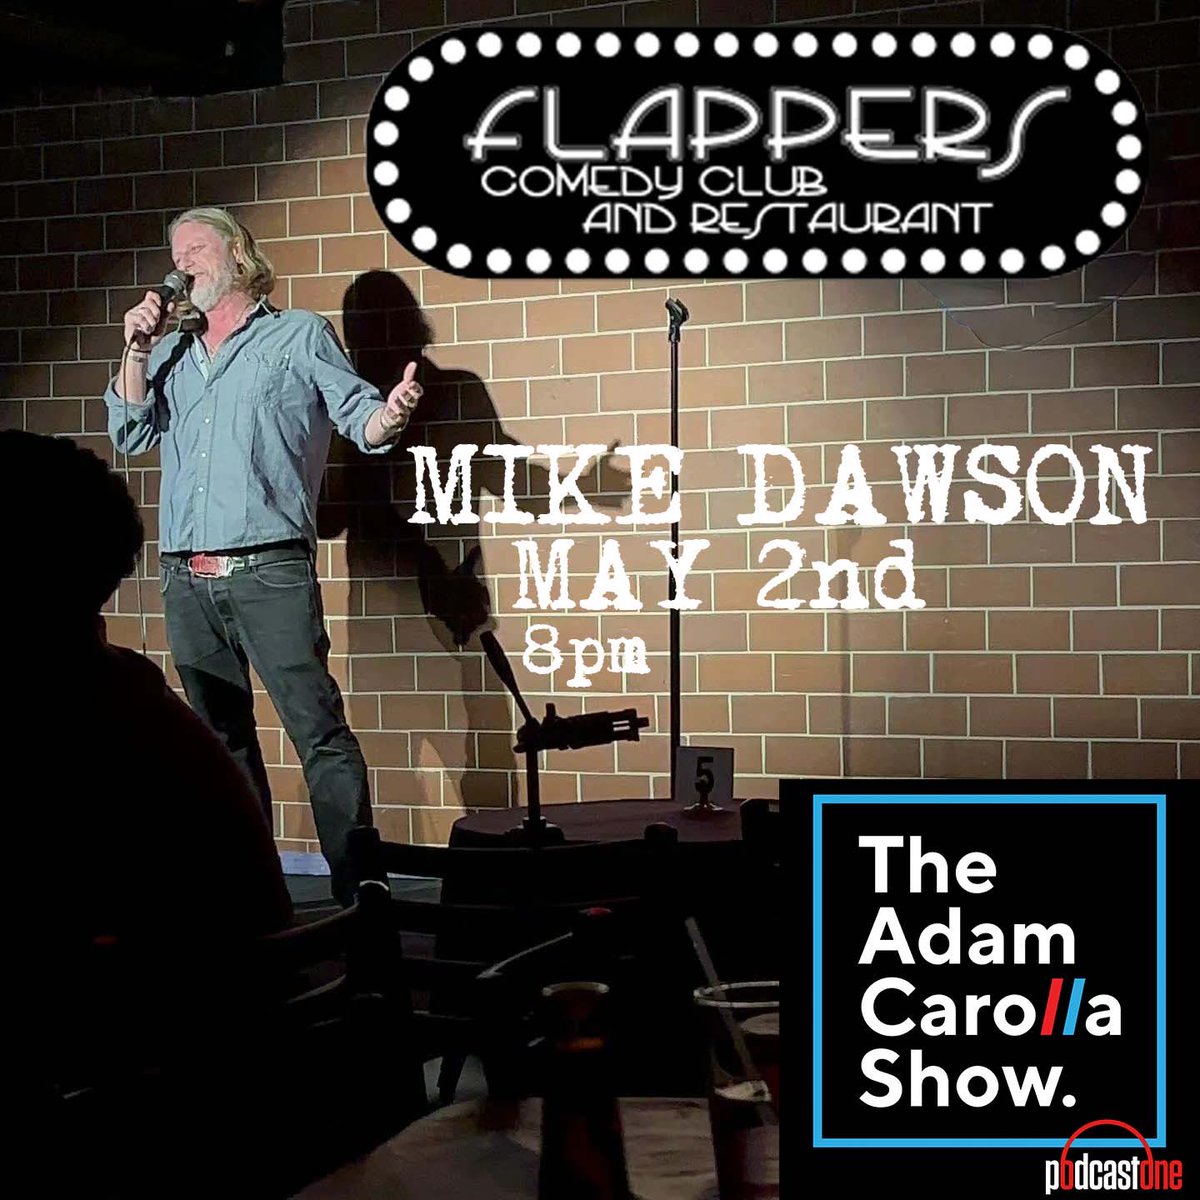 This Thursday night I’m back at ⁦@FlappersComedy⁩ Message me for discount tickets